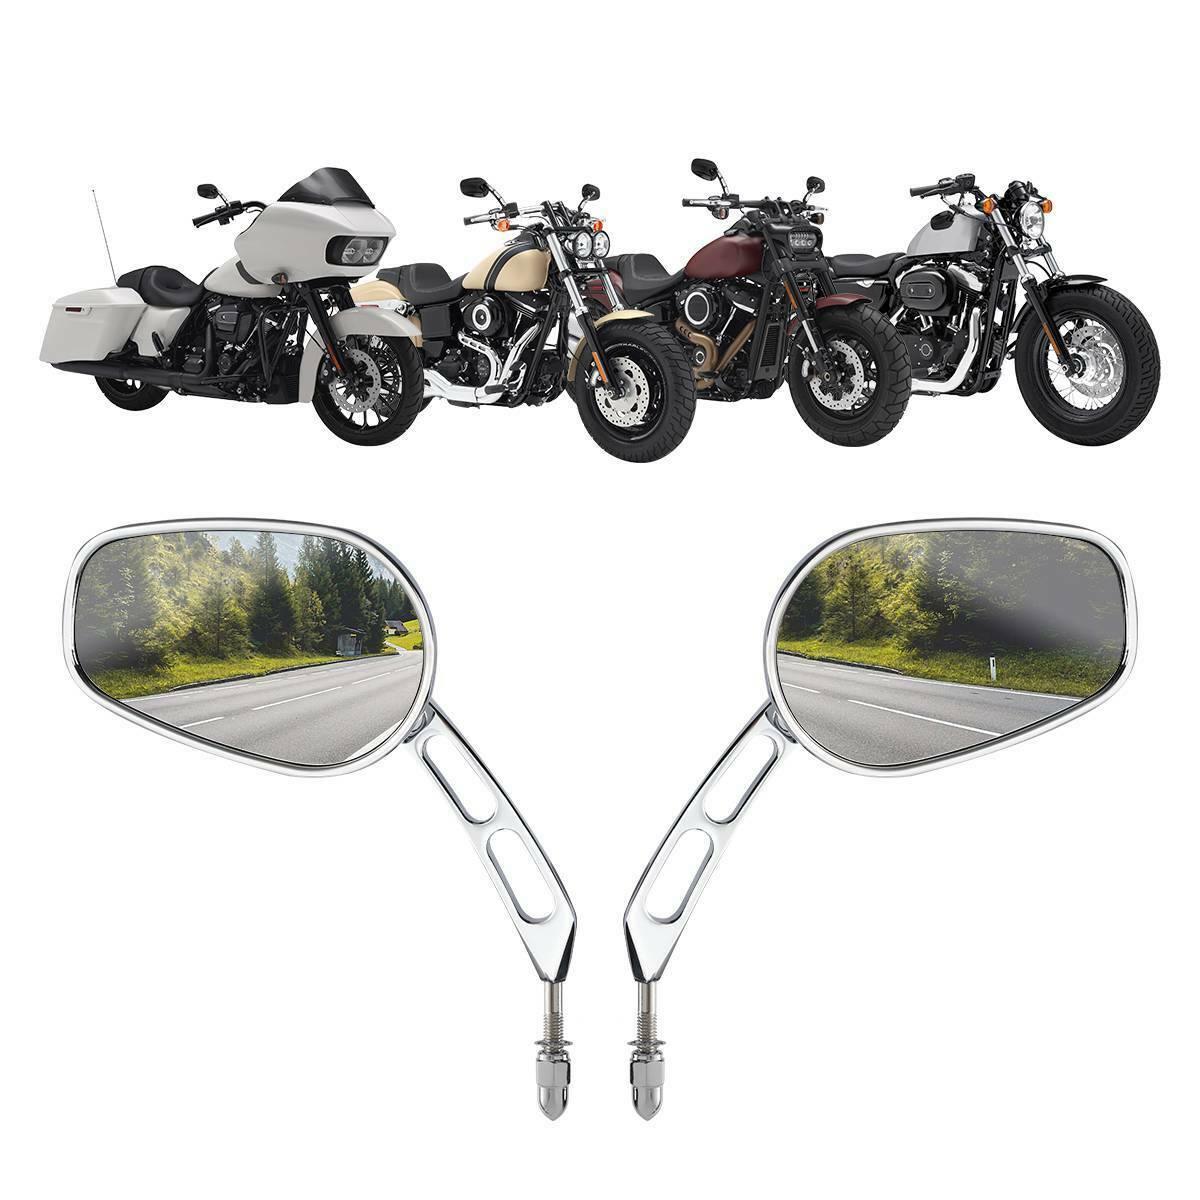 Chrome Rearview Mirrors Fit For Harley CVO Tri Electra Street Glide Freewheeler - Moto Life Products